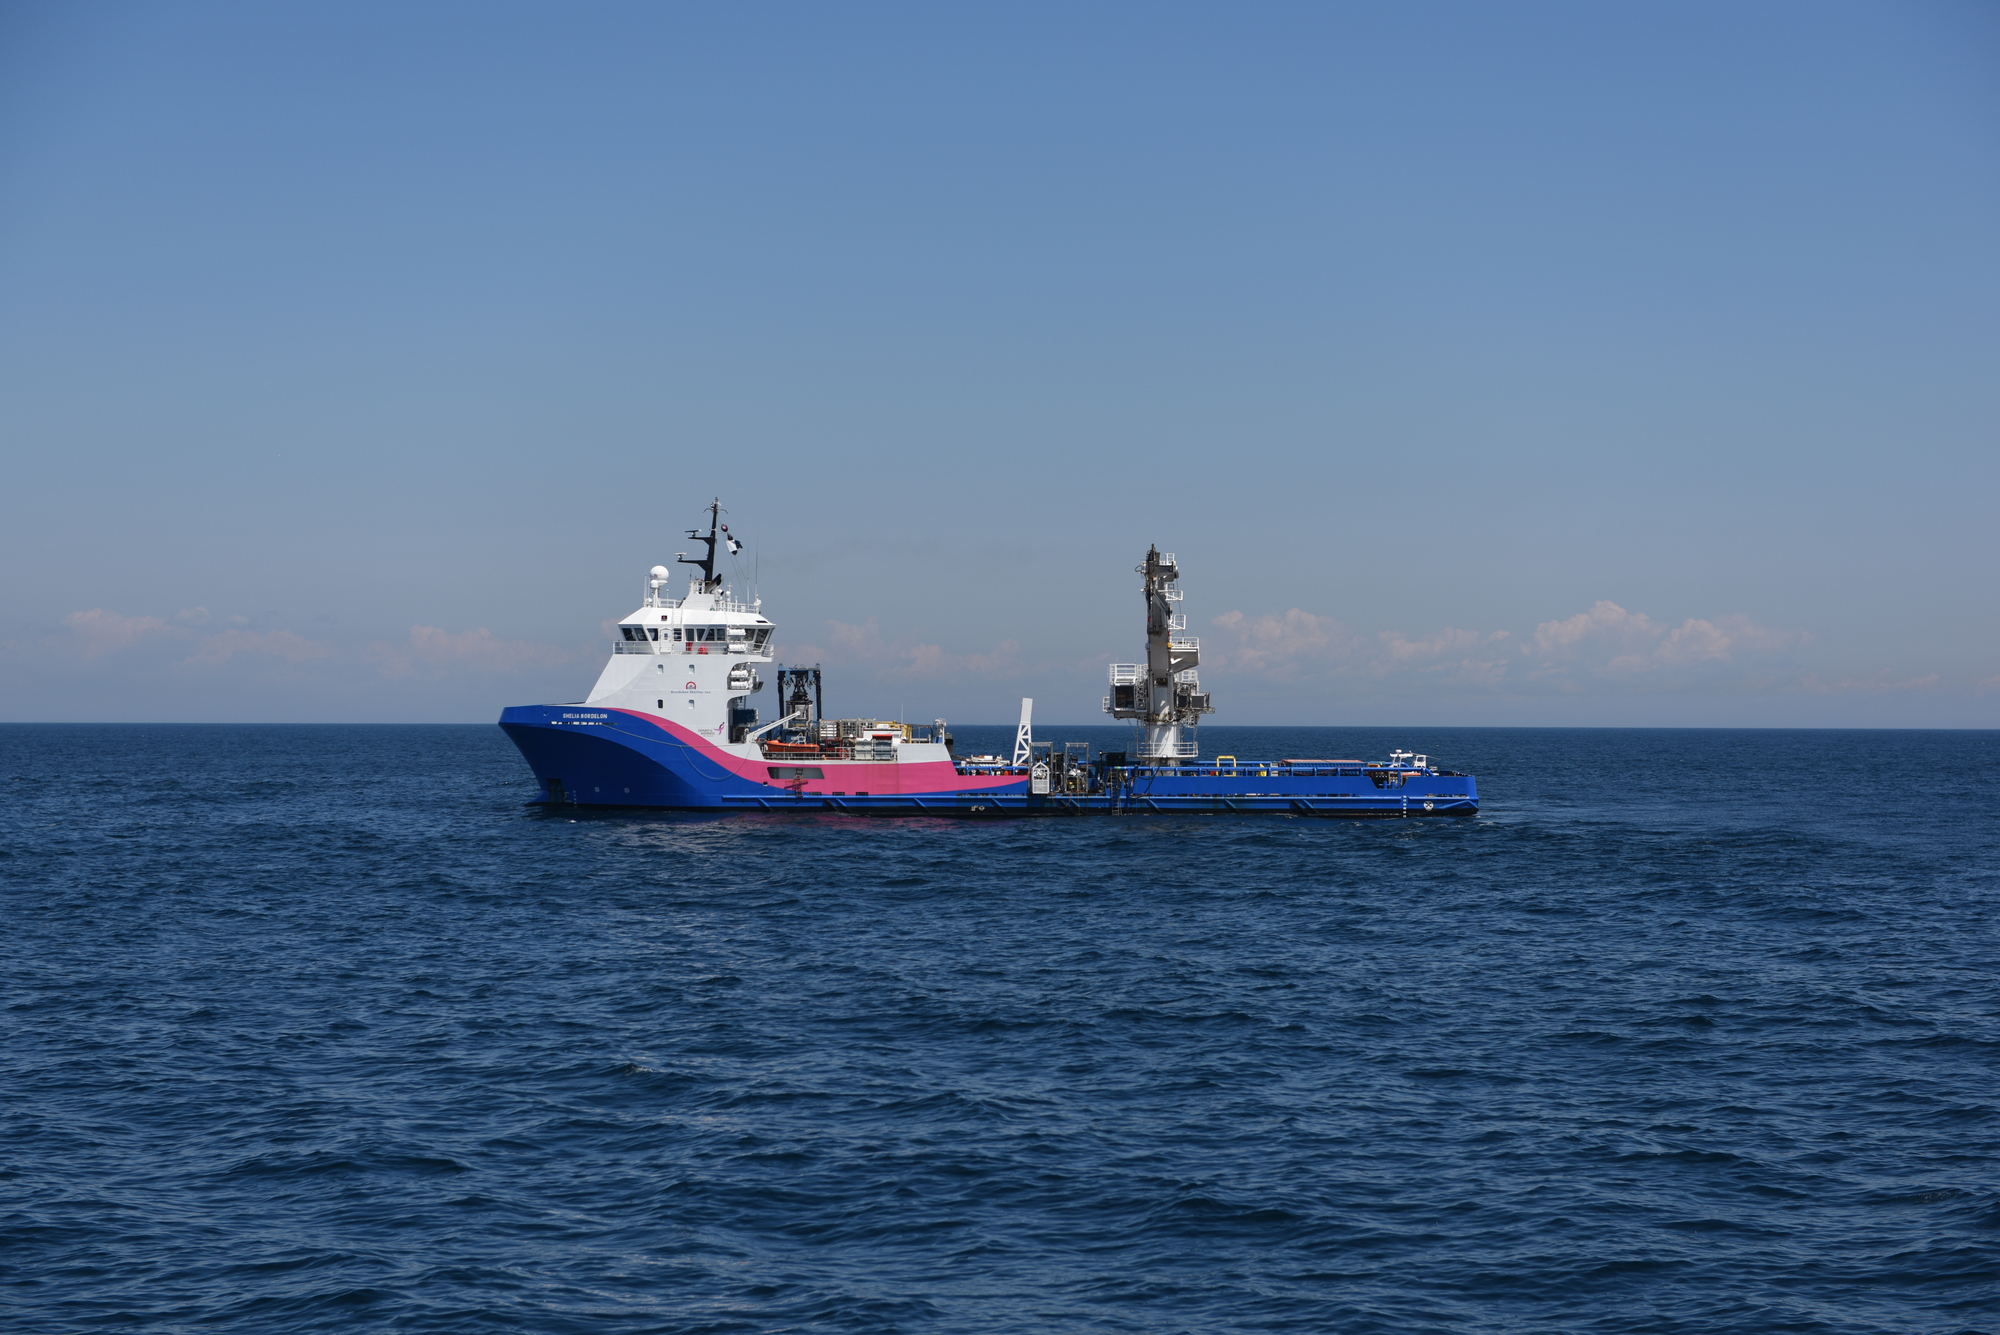 ATLANTIC OCEAN – The Shelia Bordelon sits in the Atlantic Ocean above the wreck of the tanker Coimbra, May 16, 2019. The U.S. Coast Guard has contracted Resolve Marine Group to conduct a full assessment of oil remaining on the Coimbra wreck, located approximately 30 miles southeast of Shinnecock, N.Y. If substantial oil still remains, and if feasible, the Coast Guard will work with Resolve Marine Group to remove oil from the wreck in order to reduce pollution risks to the environment. The Coimbra, a British-flagged supply ship, sunk off the coast of Long Island in January 1942 when a German U-boat torpedoed it. (U.S. Coast Guard photo by Chief Warrant Officer Allyson E.T. Conroy)